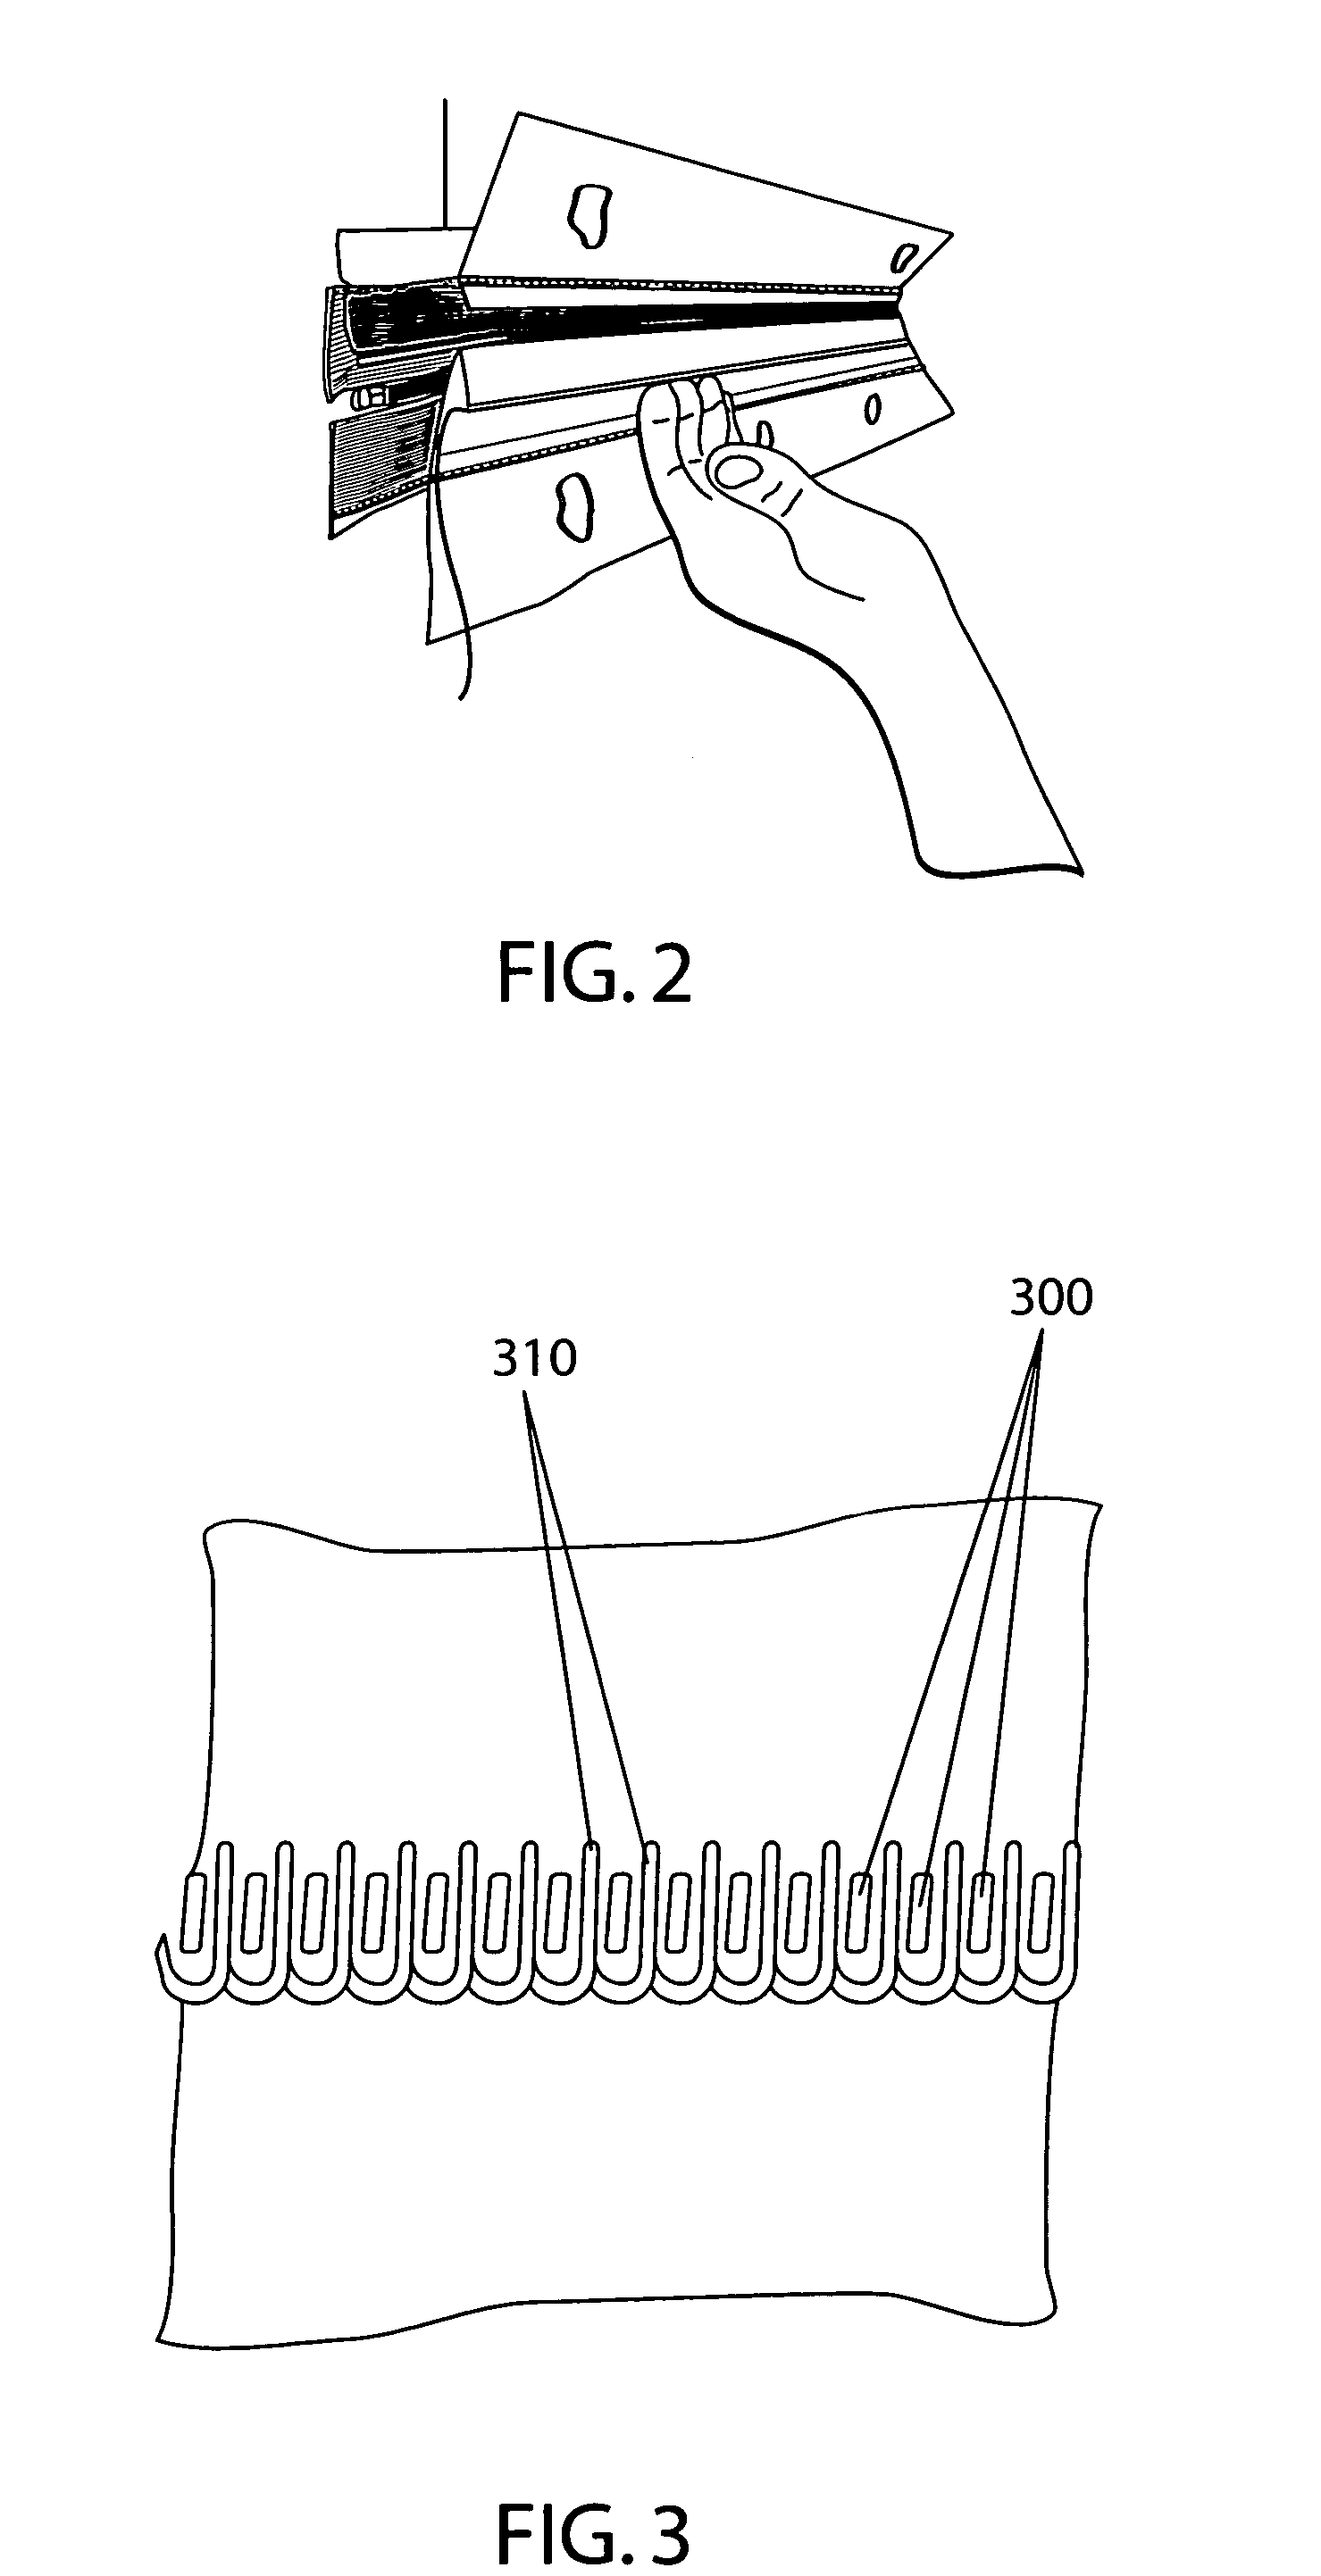 Method and device for stabilizing unseamed loops